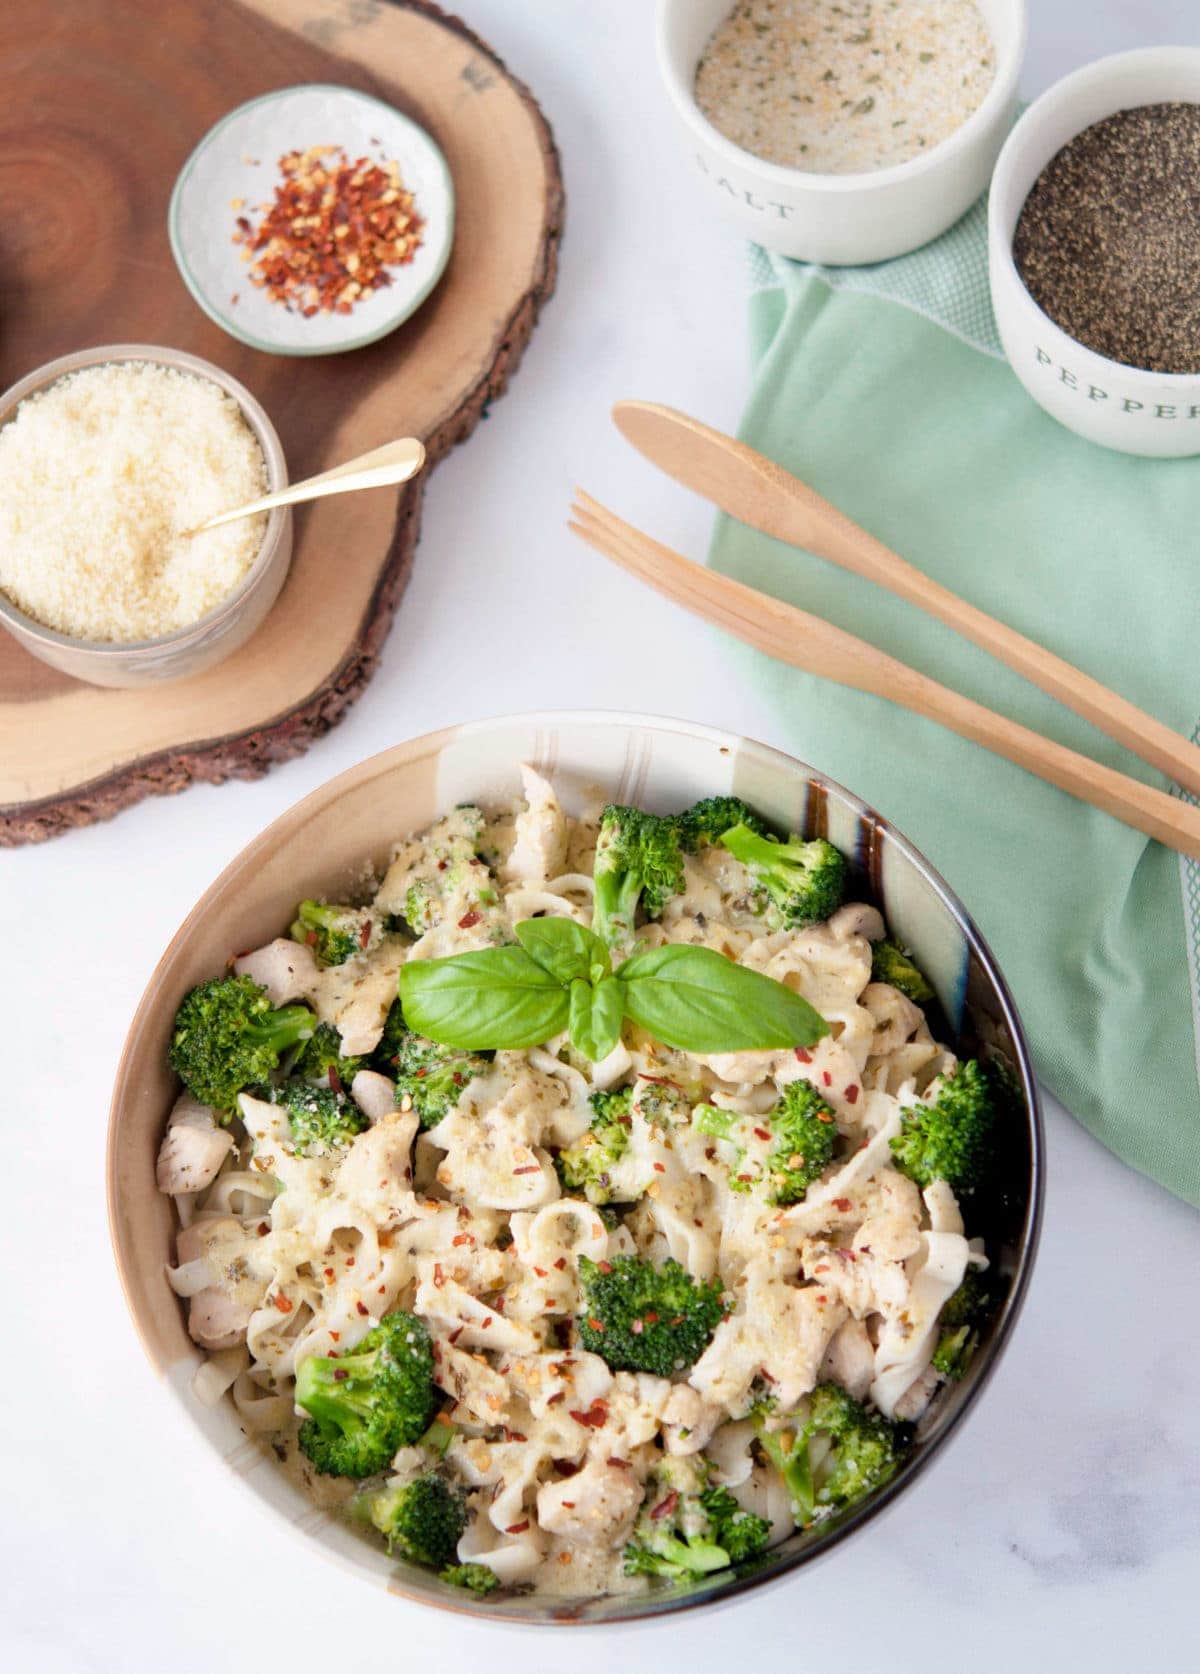 Chicken and Broccoli Keto Fettuccine Alfredo with Pesto is comfort food at its finest. If you've been missing pasta on your low carb diet, look no further.